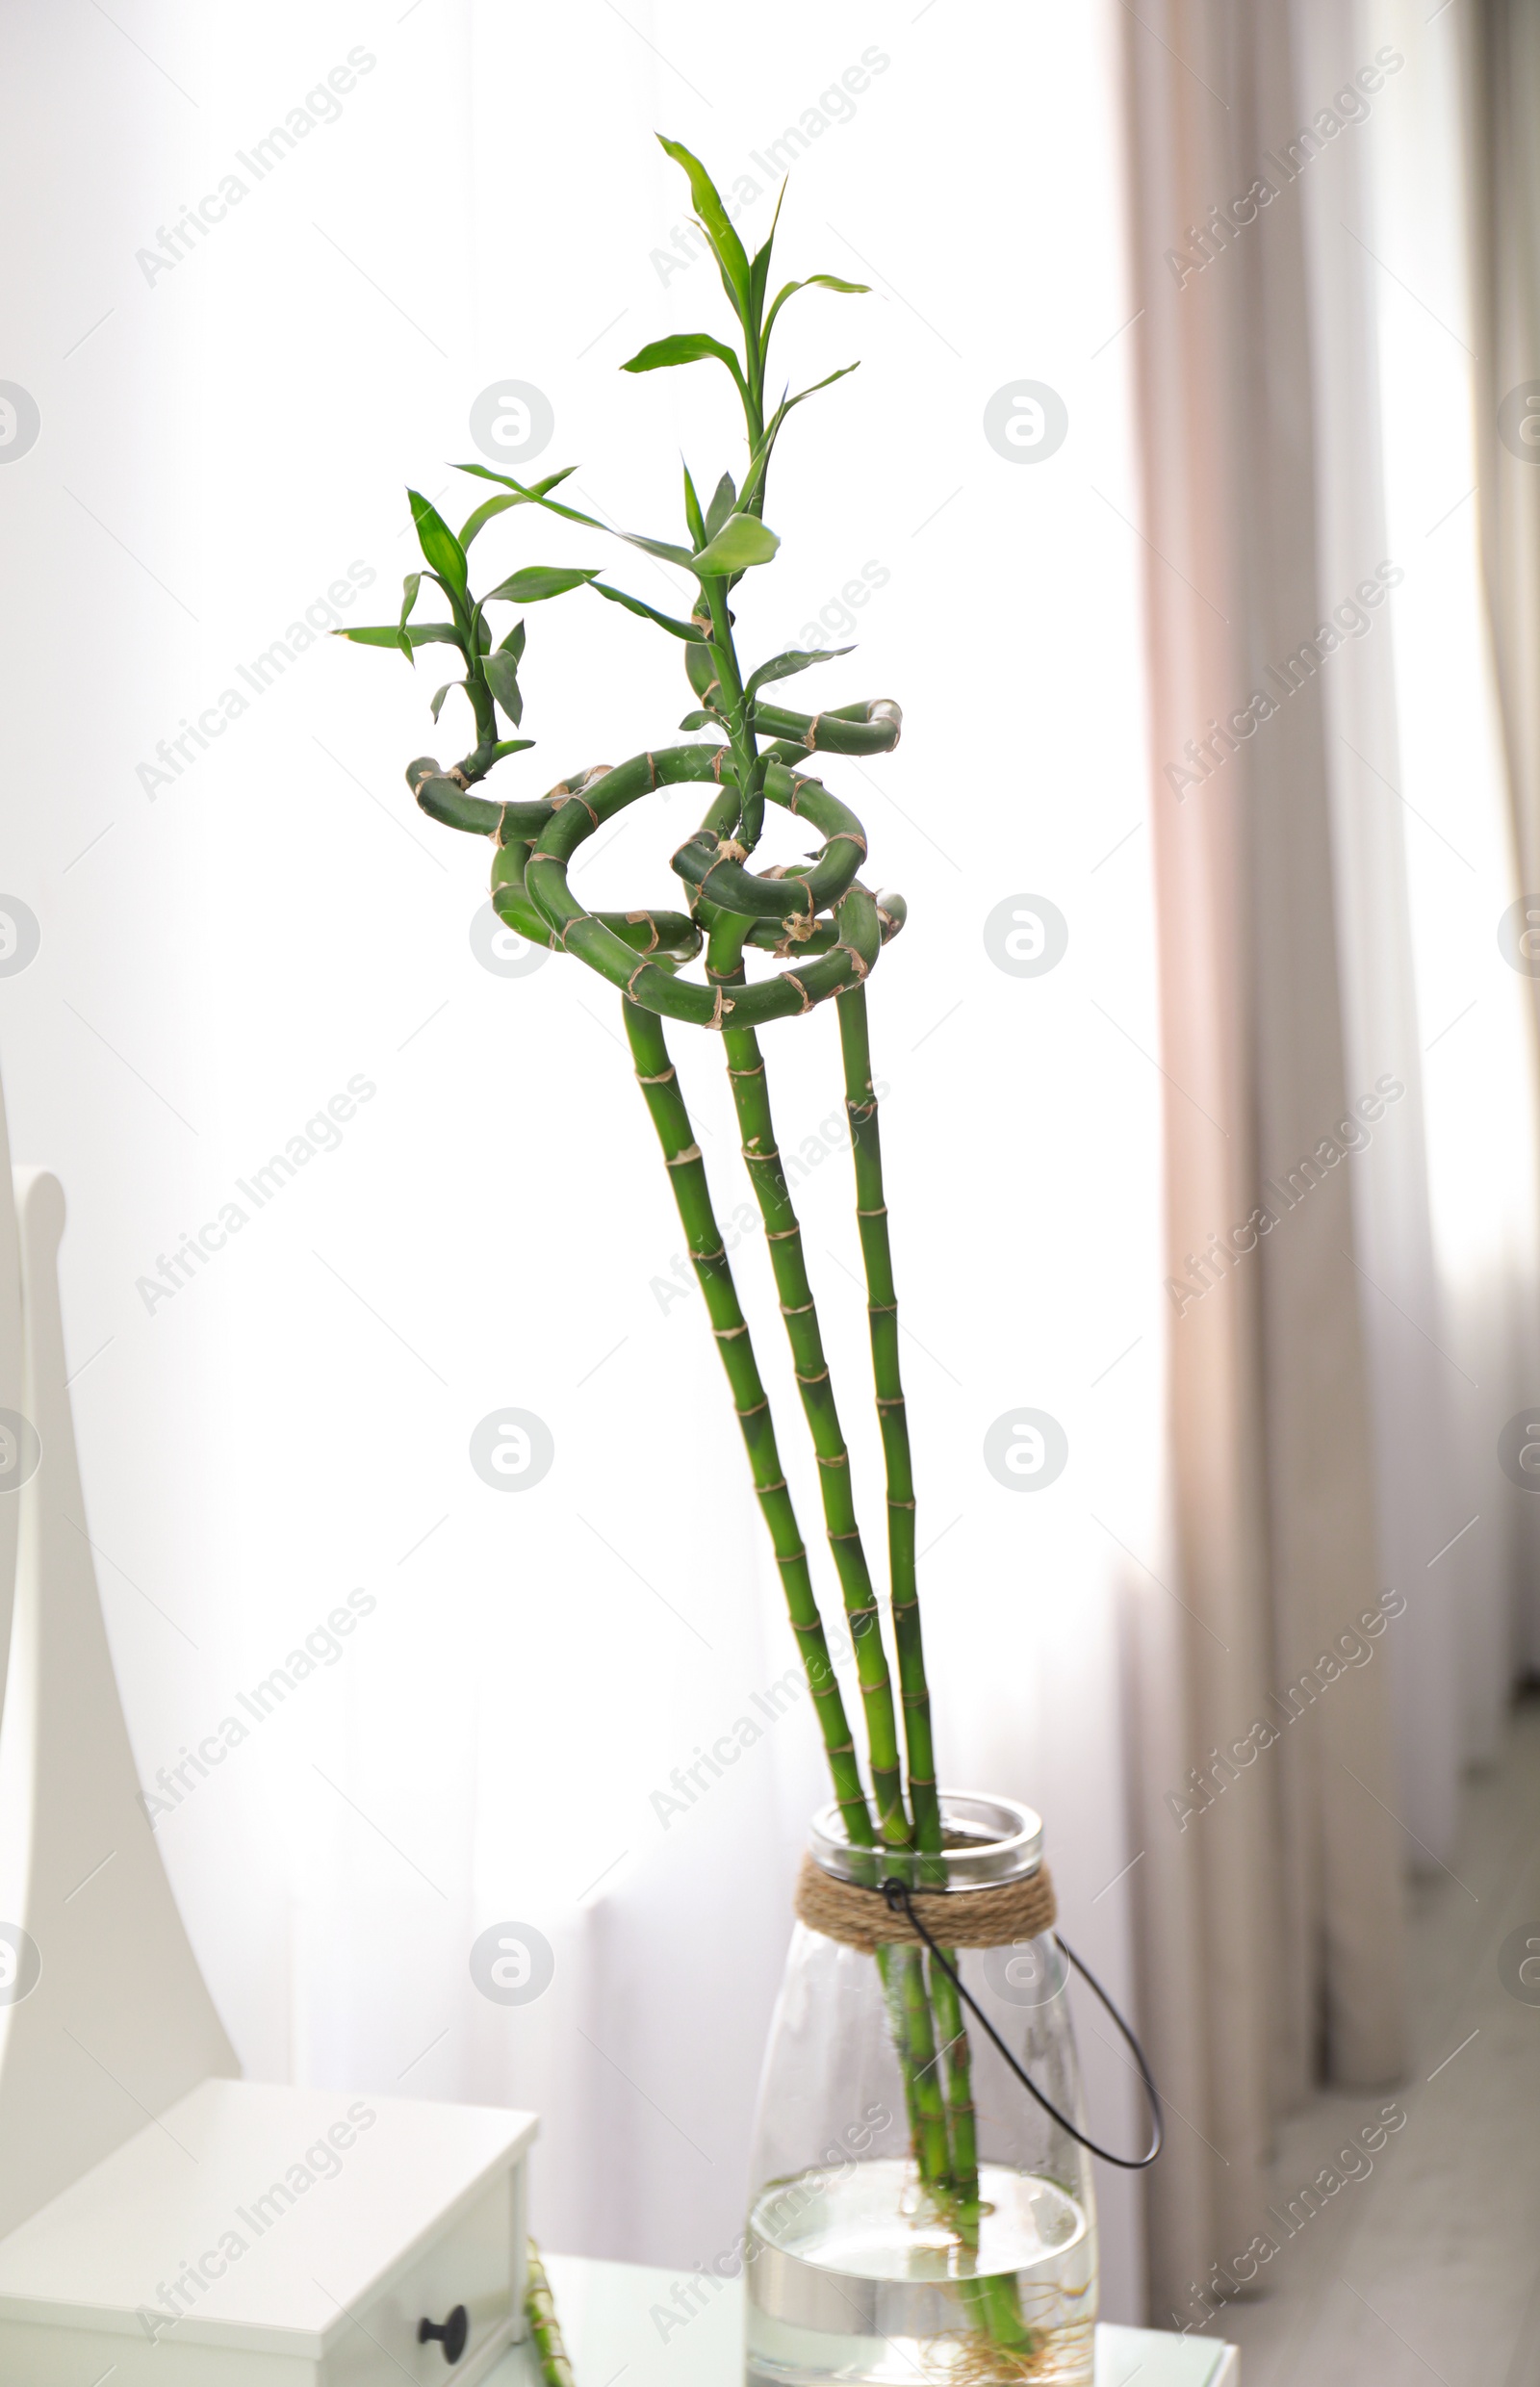 Photo of Green tropical plant in vase on table. Modern decor for stylish interior